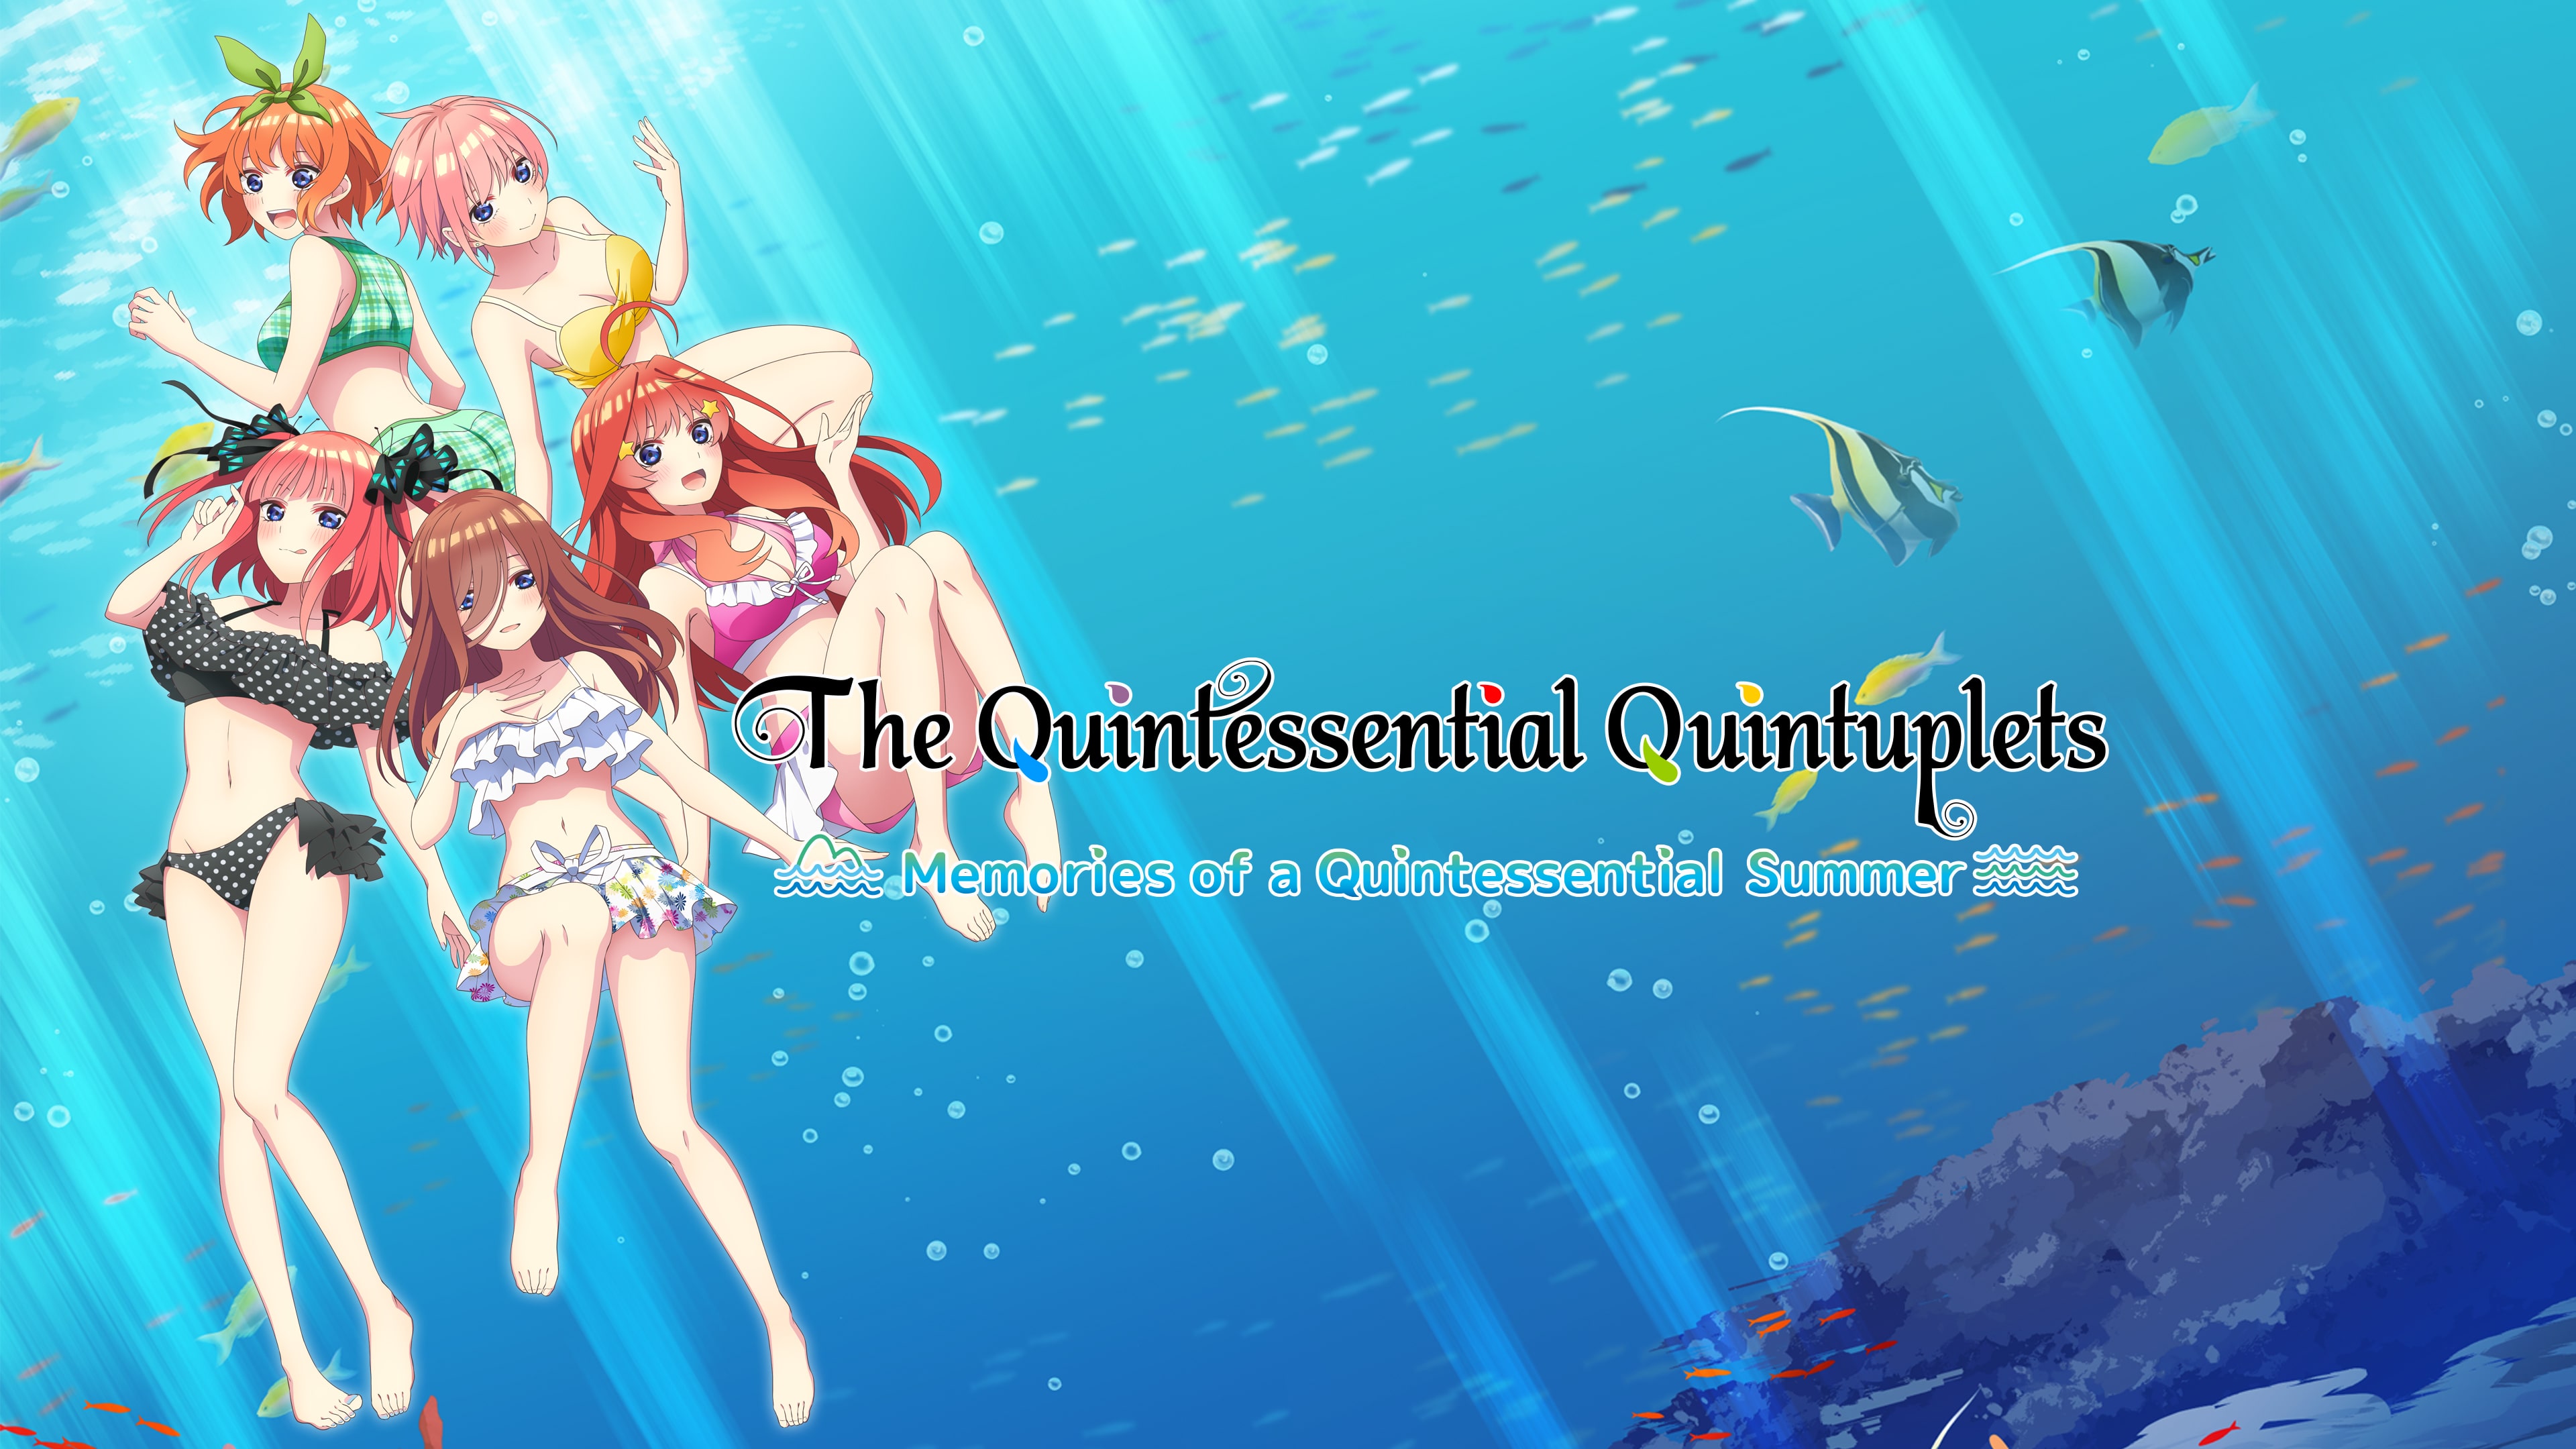 The Quintessential Quintuplets - Memories of a Quintessential Summer (English, Japanese, Traditional Chinese)